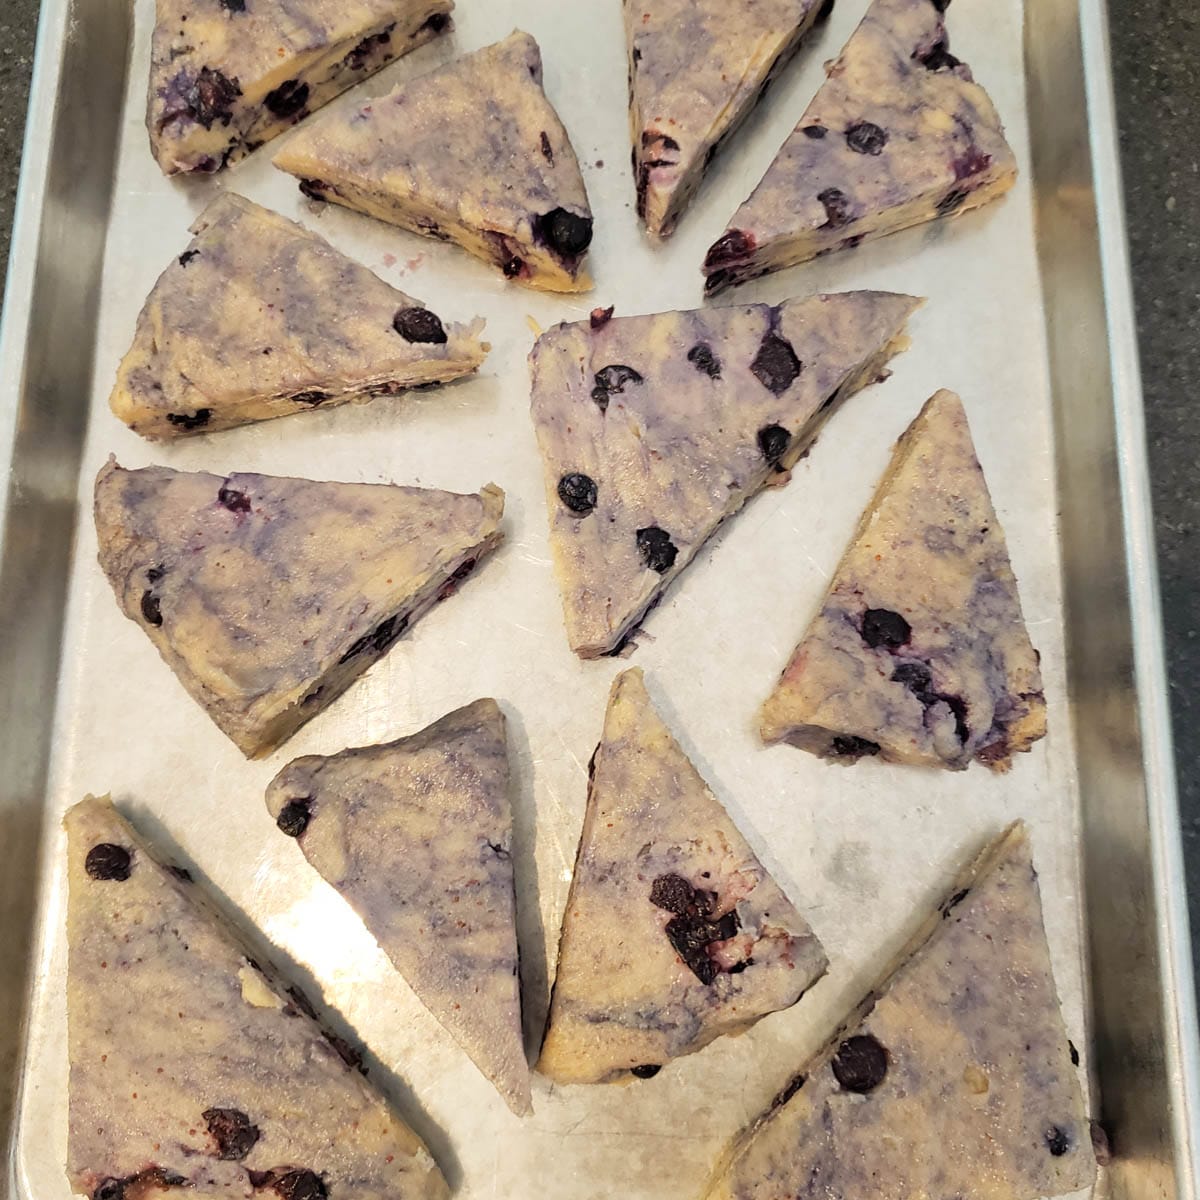 Raw scone triangles on a metal baking sheet.